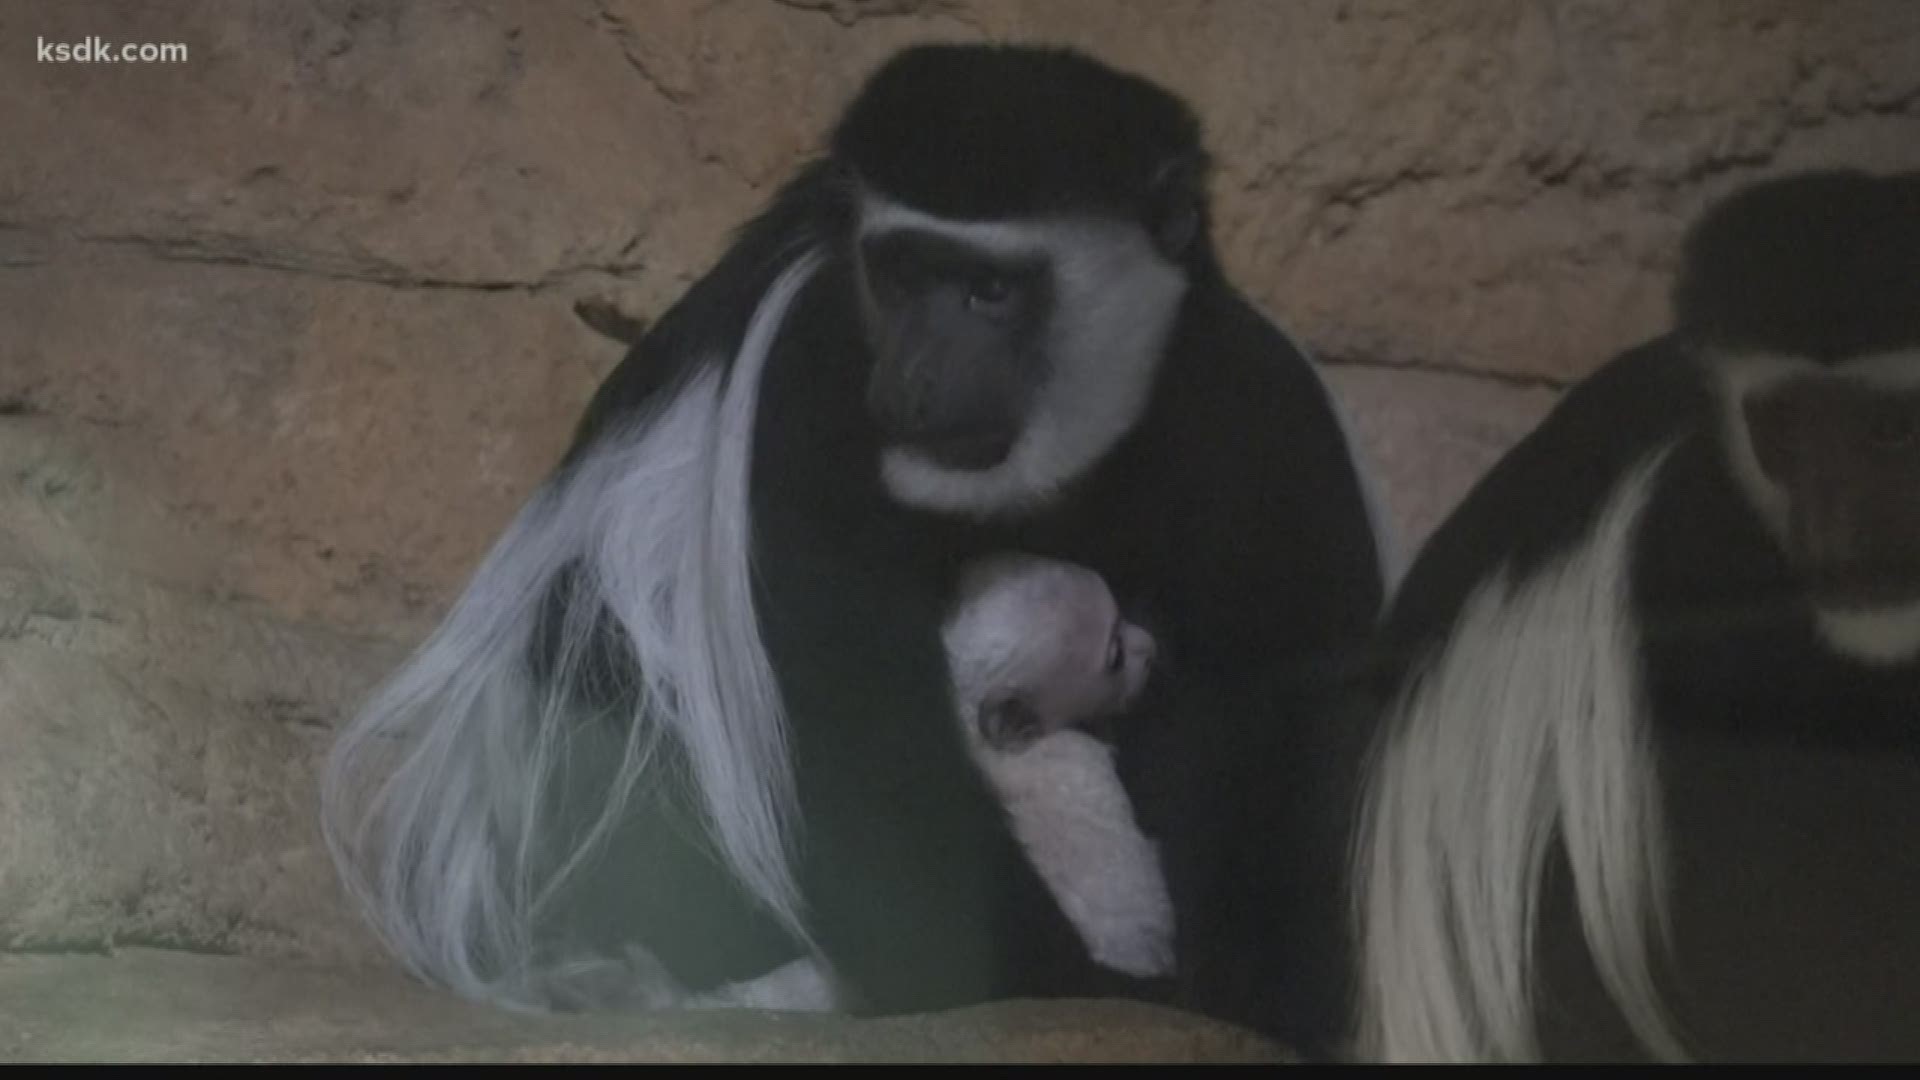 Teak is a black and white colobus monkey and he was born at the zoo on Feb. 3.